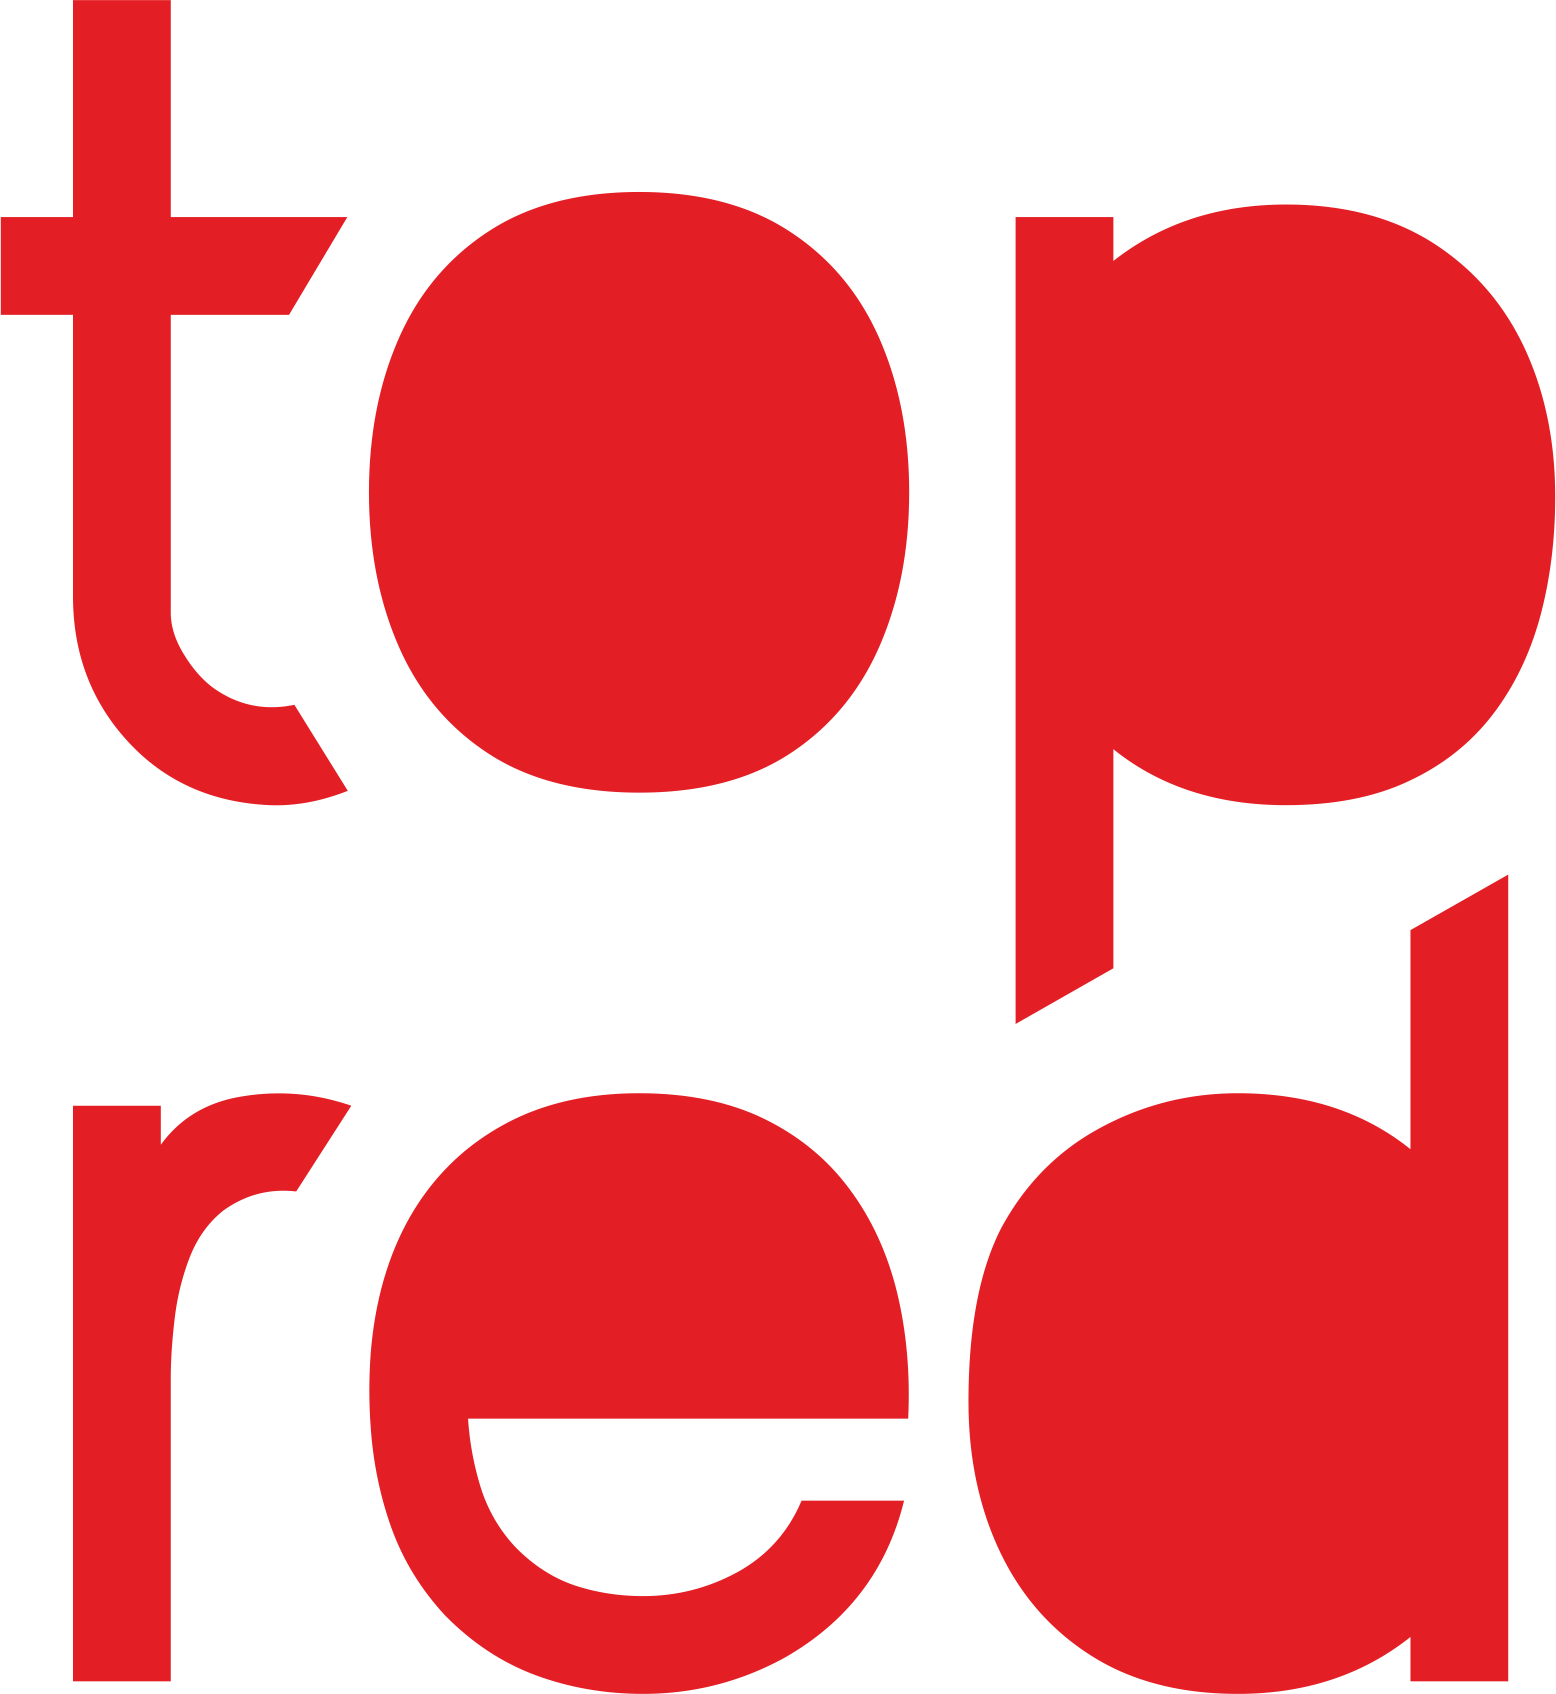 top red